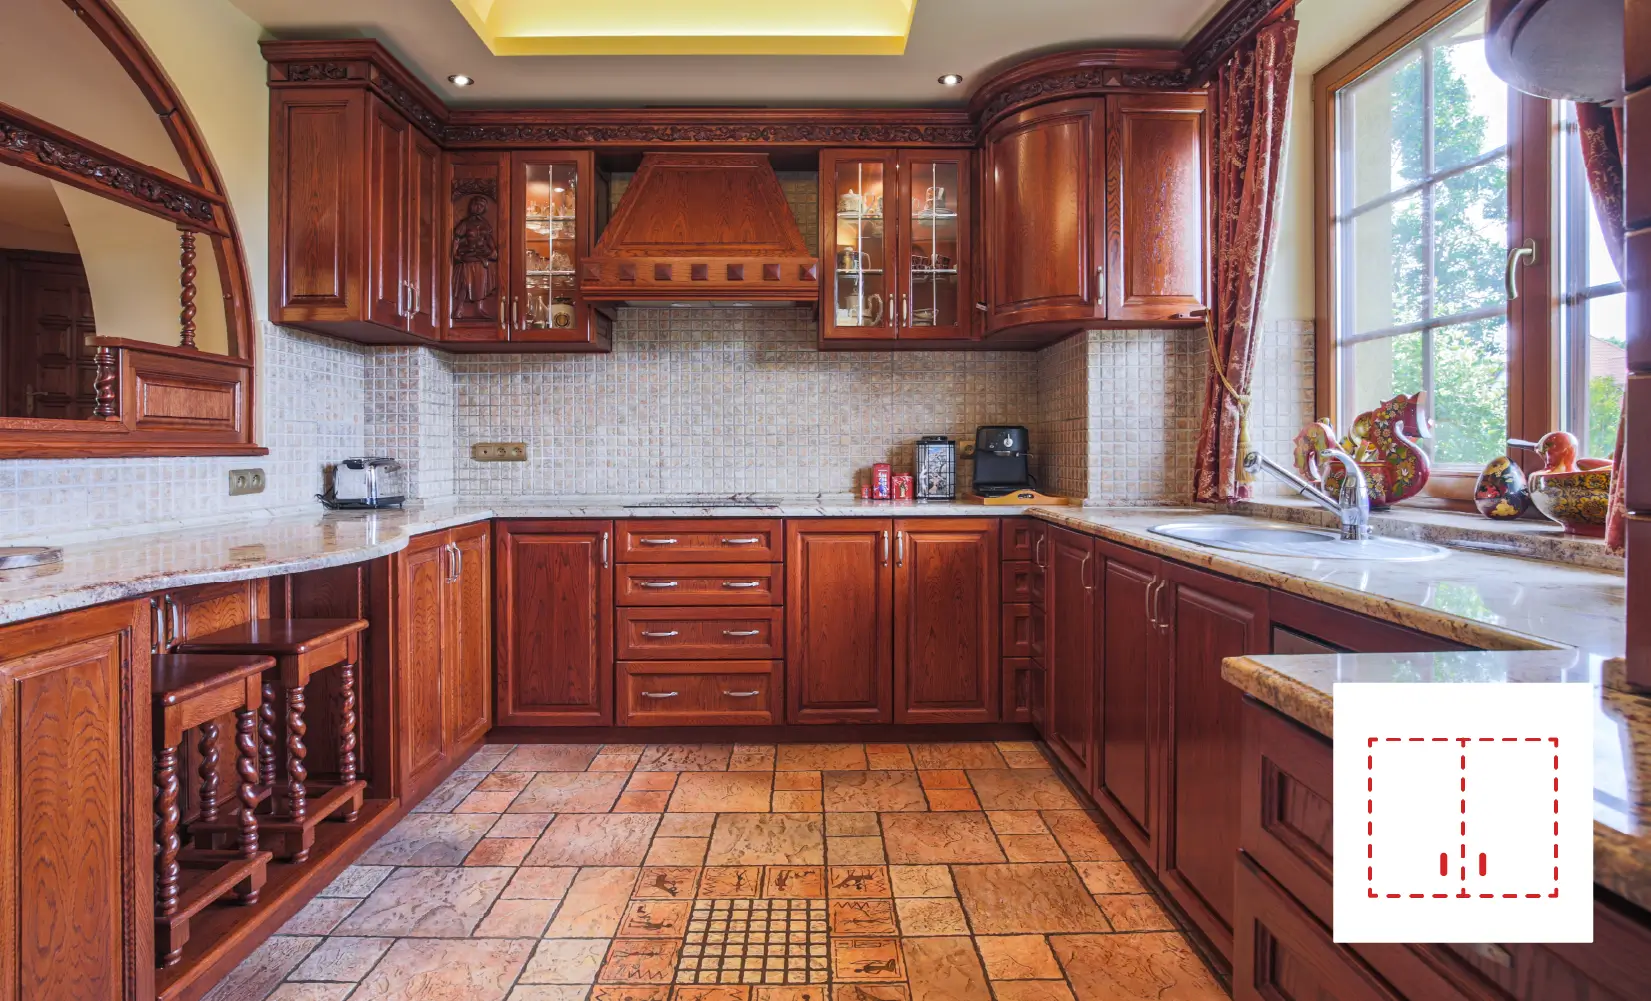 Kitchen with ornate wood custom cabinets.